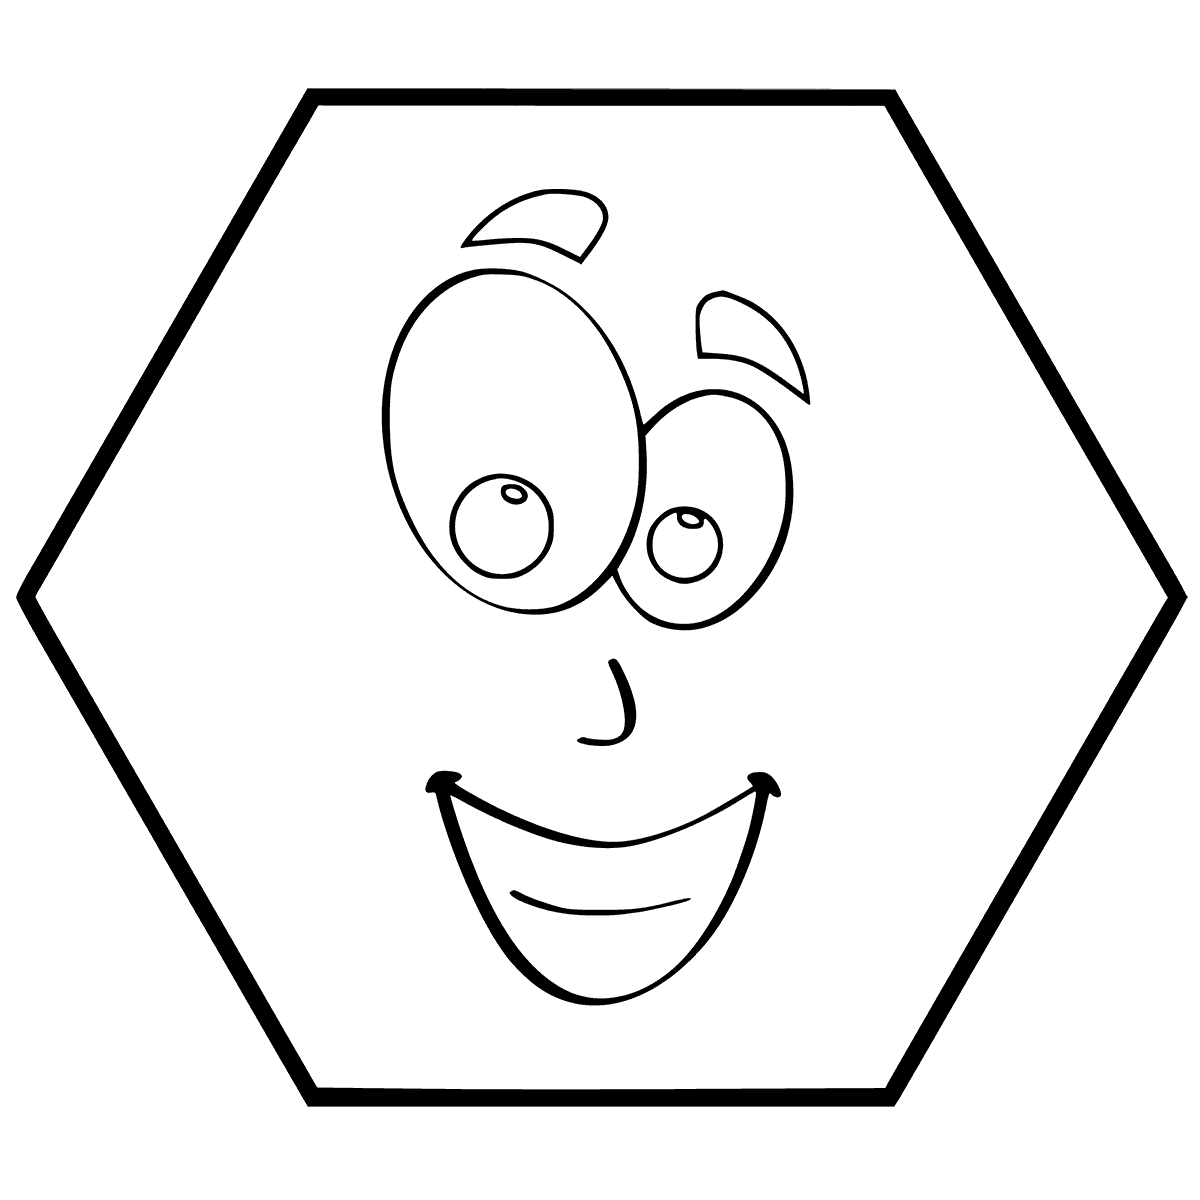 Smiling Hexagon Shape Coloring Page